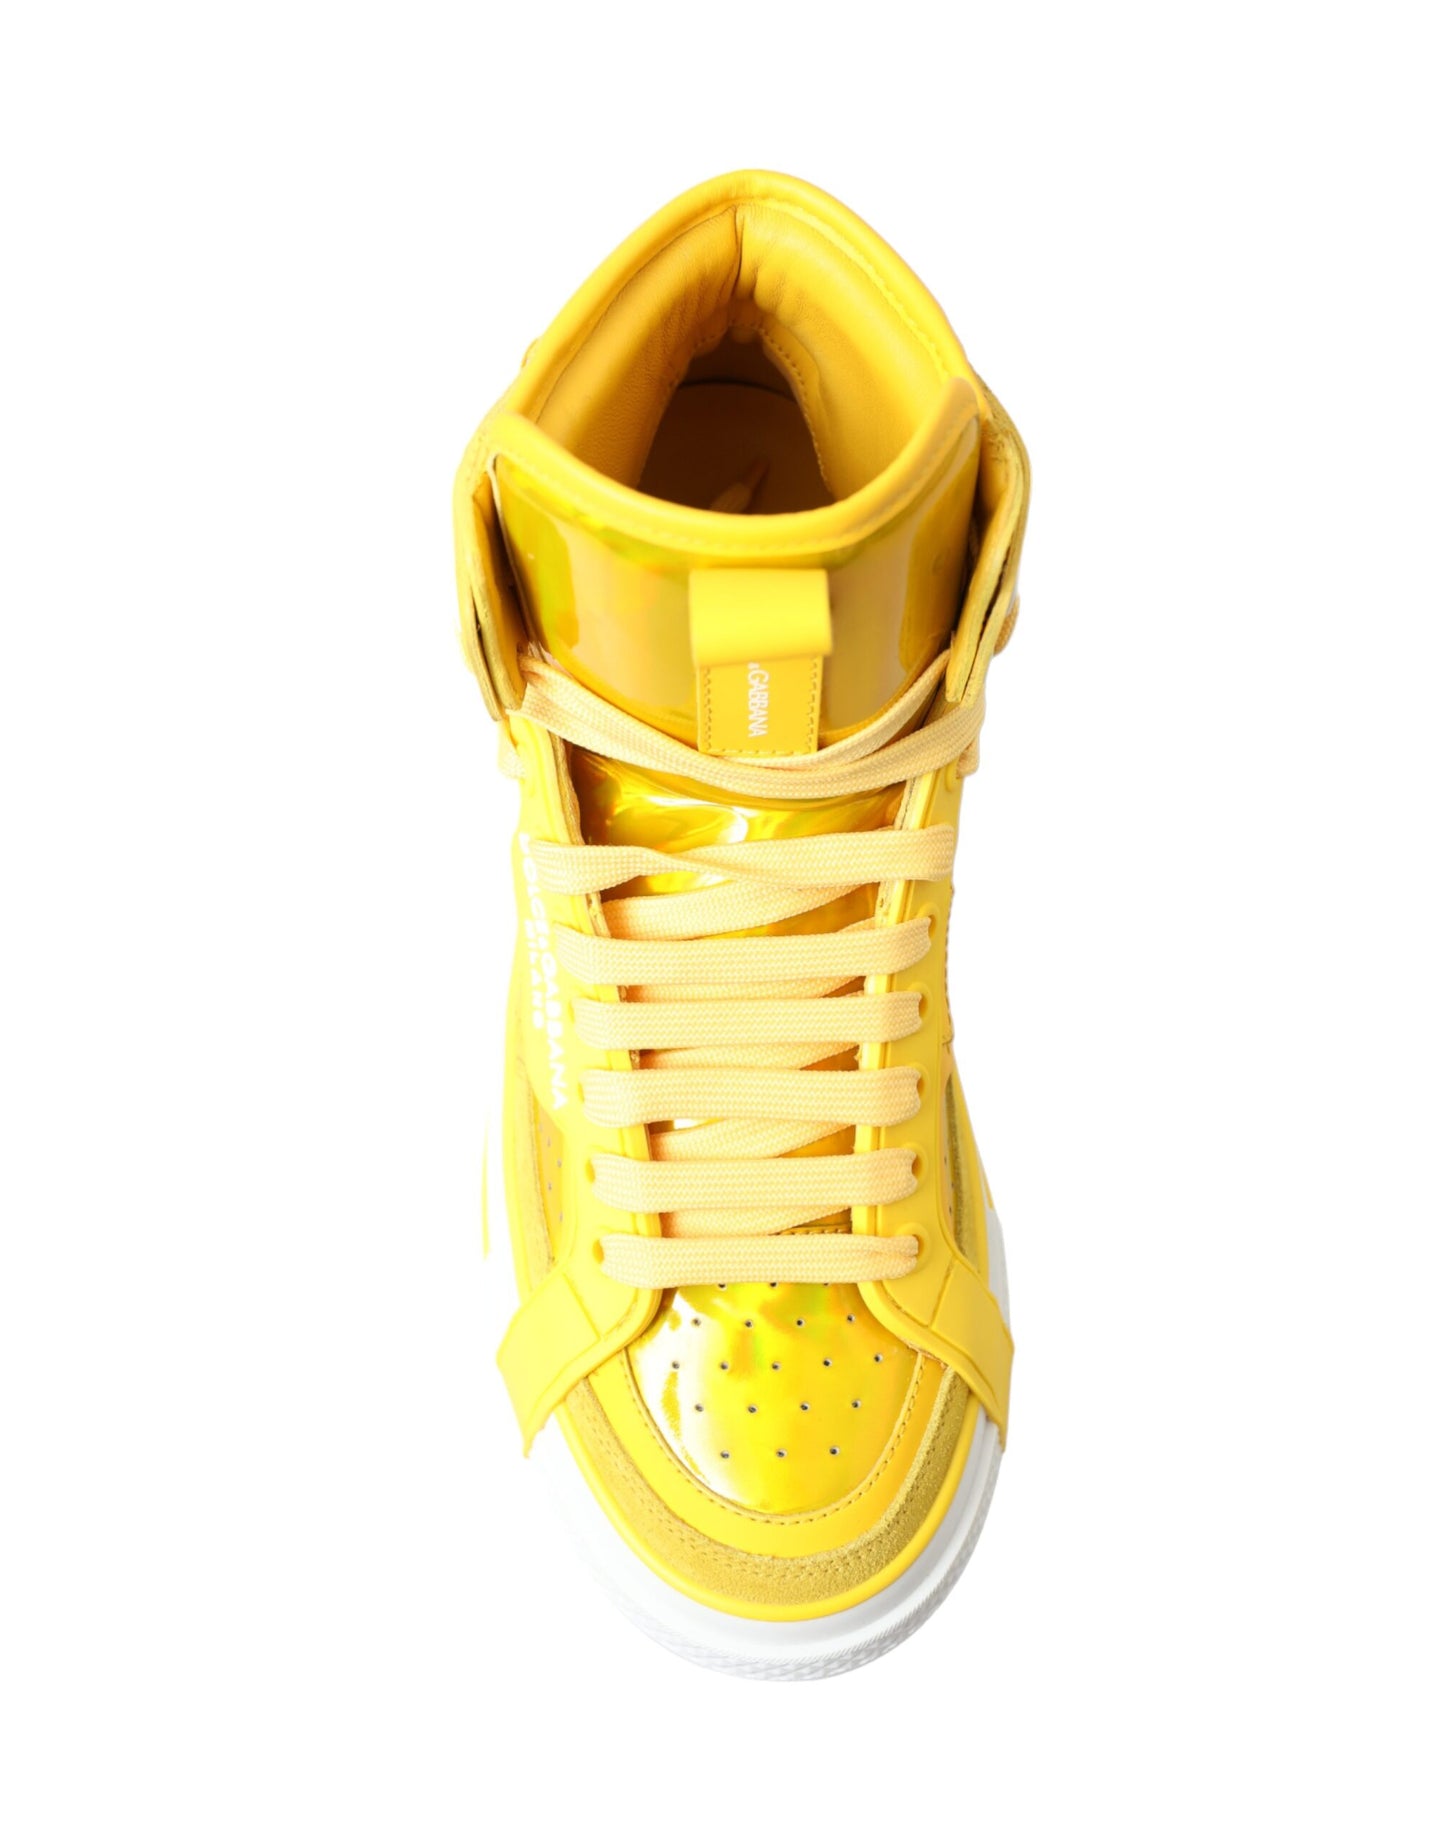 Dolce & Gabbana Chic High-Top Color-Block Sneakers